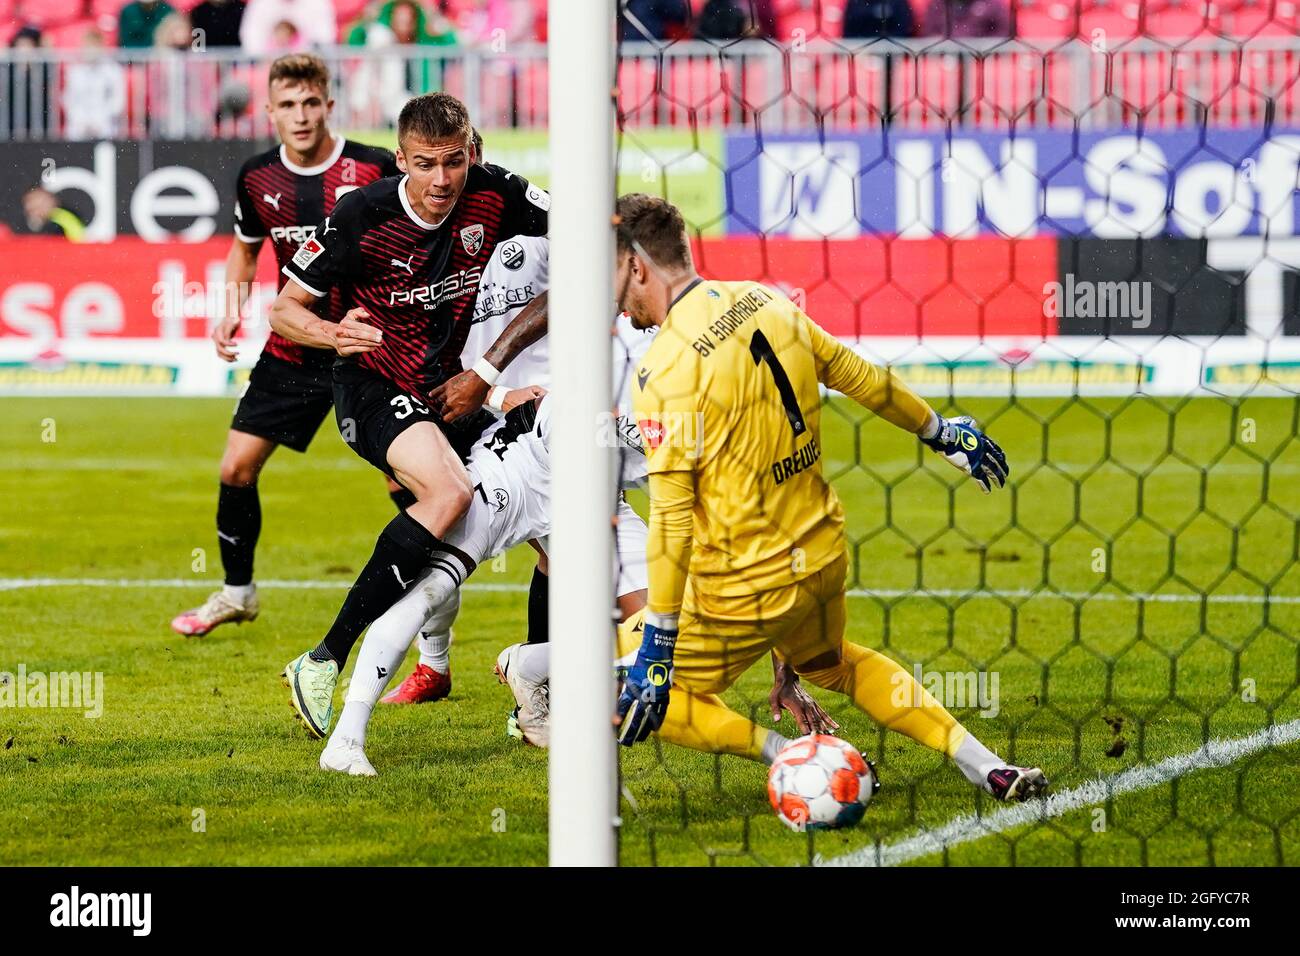 Sandhausen, Germany. 27th Aug, 2021. Football: 2nd Bundesliga, SV Sandhausen - FC Ingolstadt 04, Matchday 5, Hardtwaldstadion. Ingolstadt's Filip Bilbija (2nd from left) shoots past Sandhausen's goalkeeper Patrick Drewes to make it 0:1. Credit: Uwe Anspach/dpa - IMPORTANT NOTE: In accordance with the regulations of the DFL Deutsche Fußball Liga and/or the DFB Deutscher Fußball-Bund, it is prohibited to use or have used photographs taken in the stadium and/or of the match in the form of sequence pictures and/or video-like photo series./dpa/Alamy Live News Stock Photo